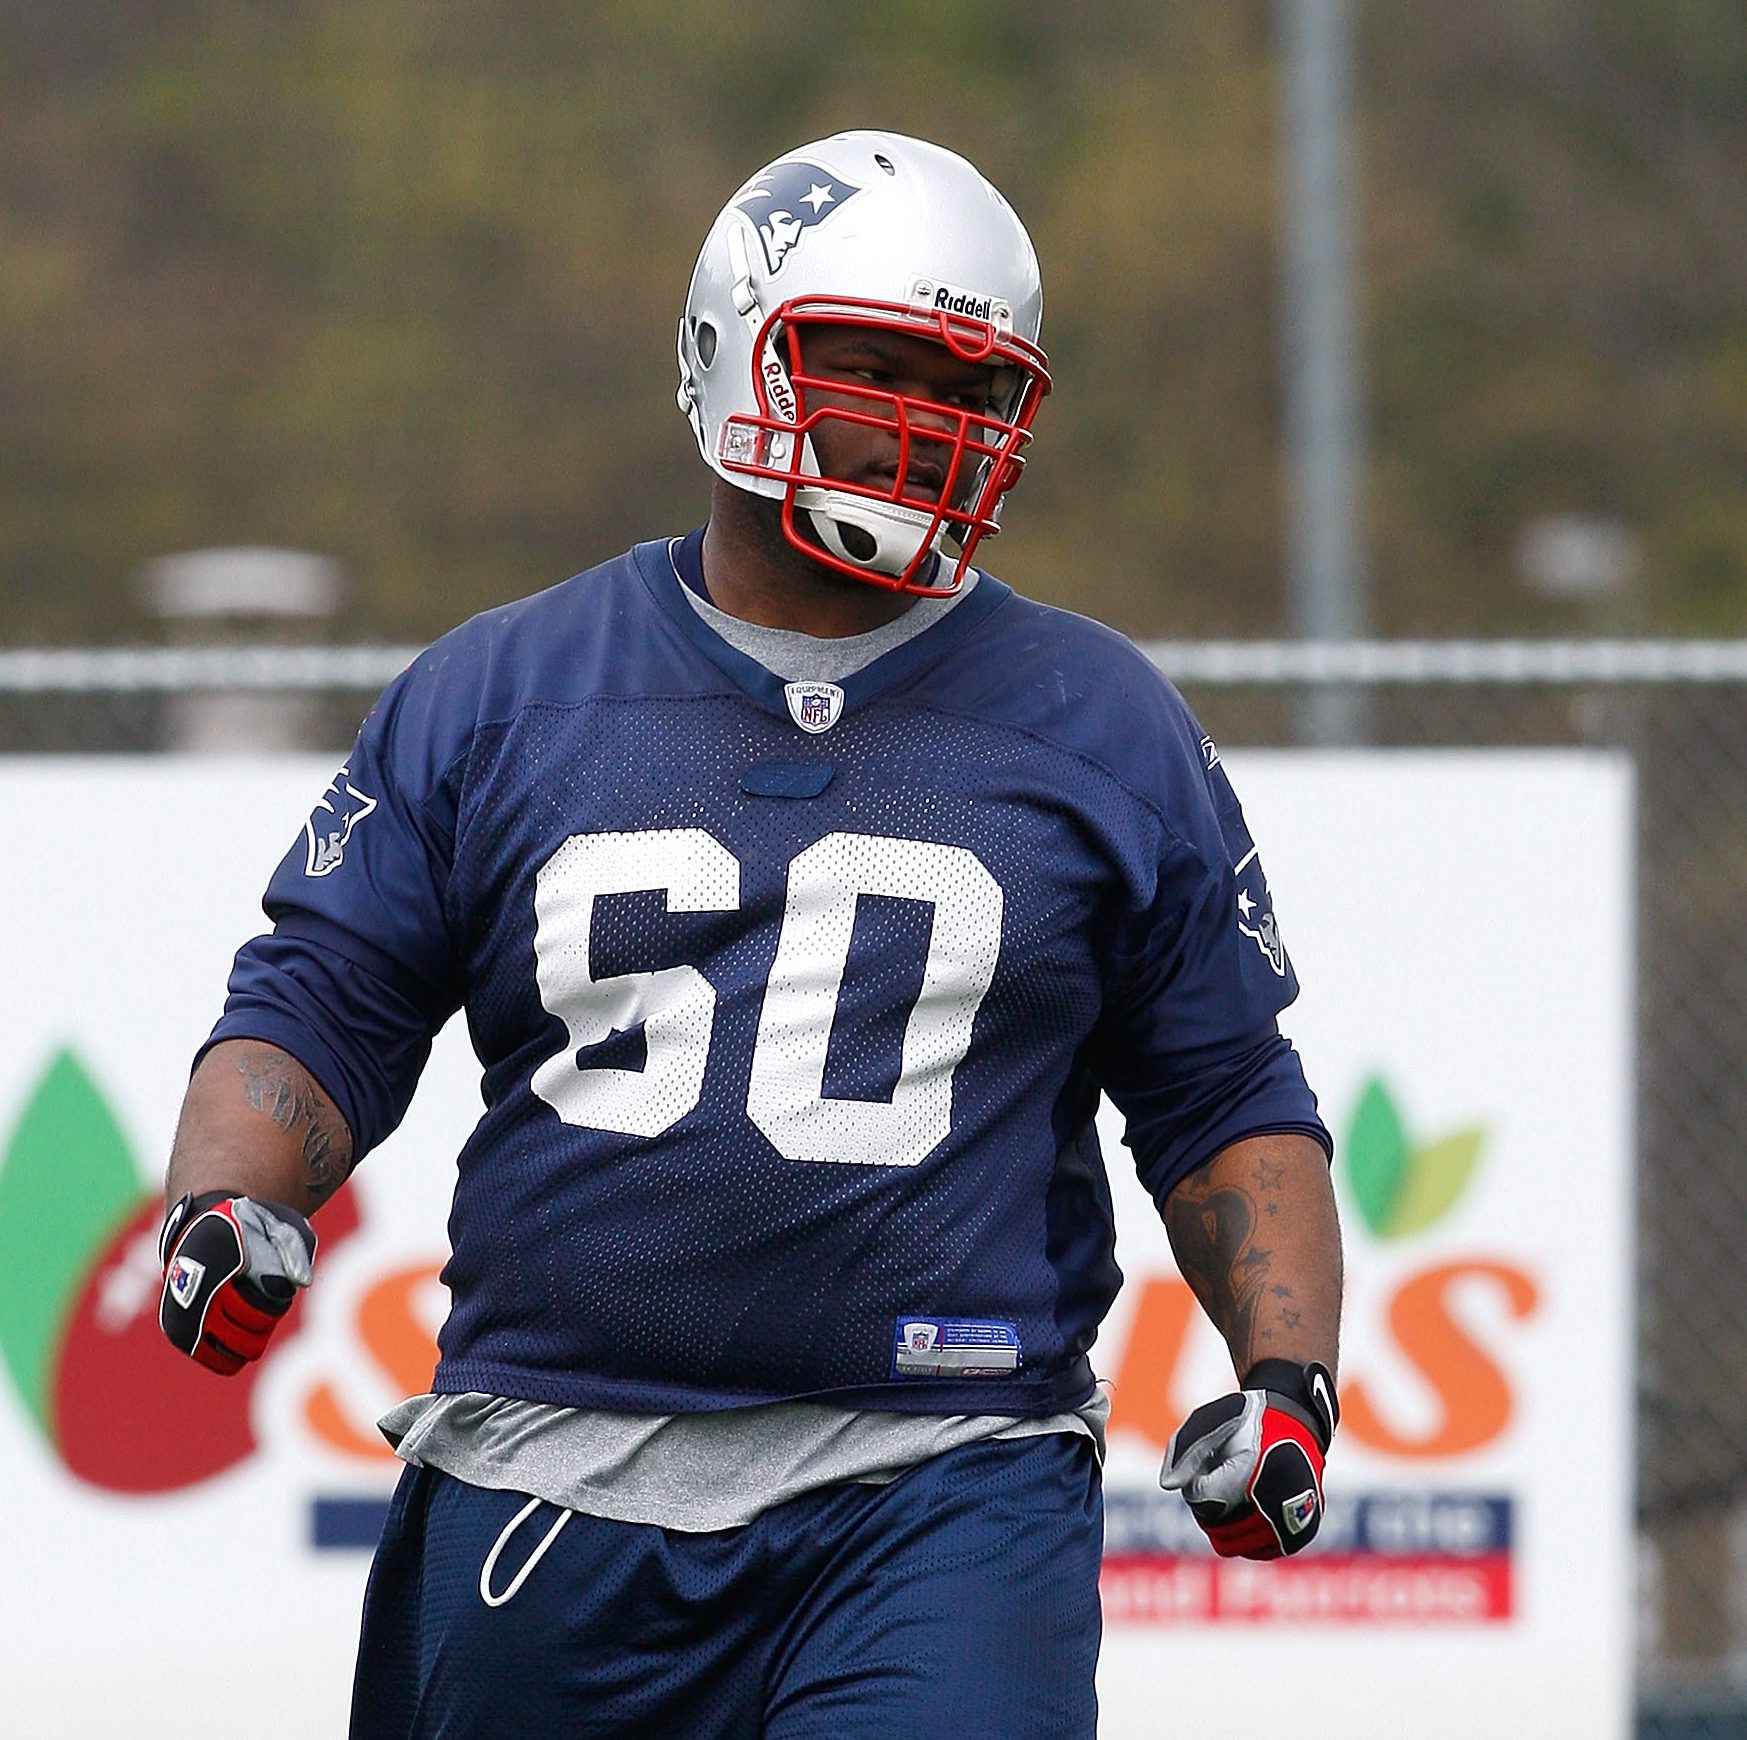 Ron Brace participates in a drill during the New England Patriots Minicamp at Gillette Stadium May 2, 2009 in Foxborough, Massachusetts. (Getty)